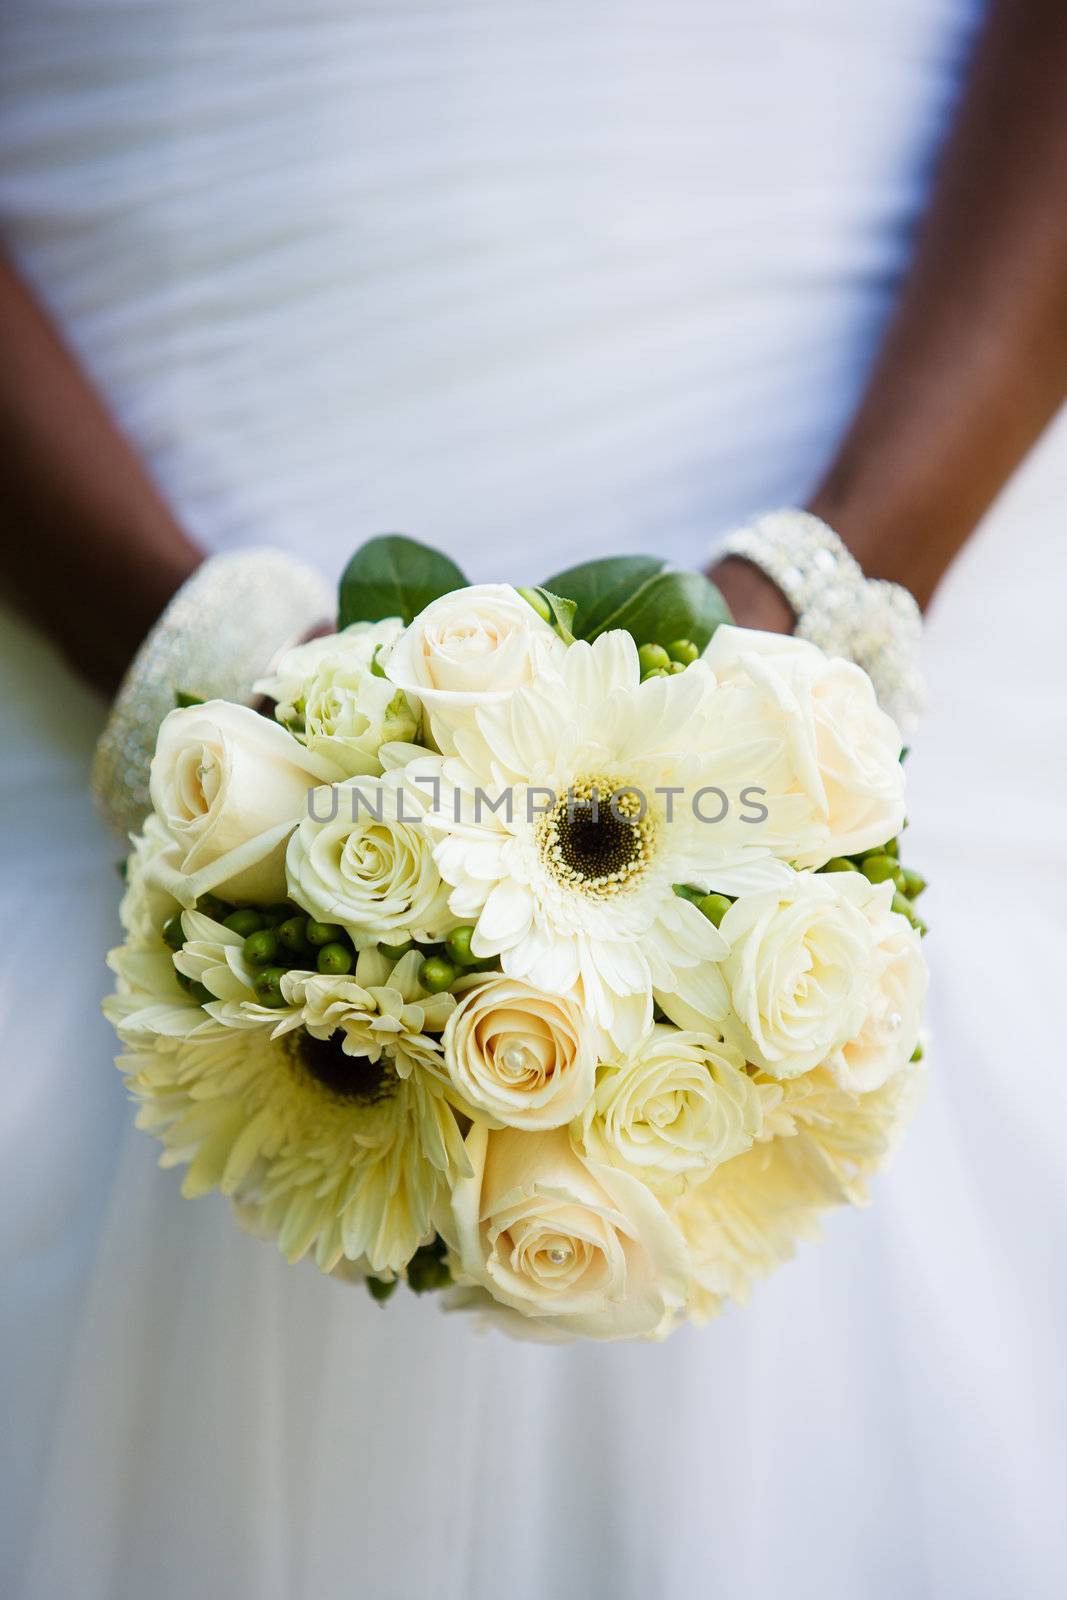 Wedding bouquet by Talanis